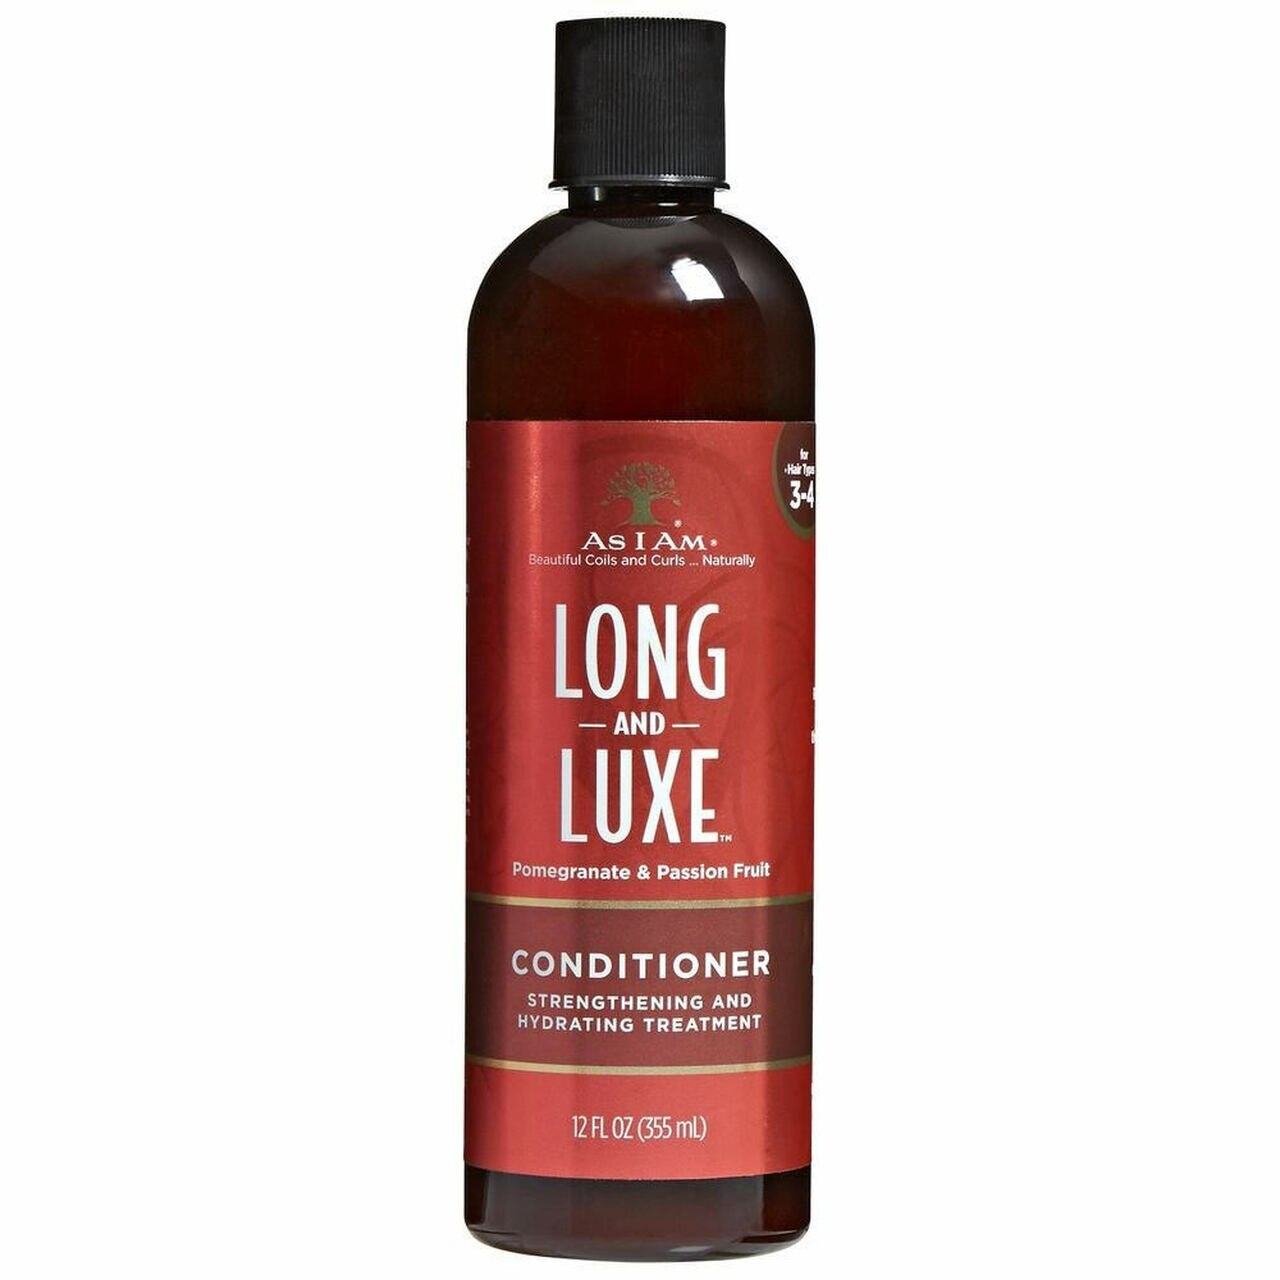 As i am Long & Luxe conditioner strengthening and hydrating treatment 12oz